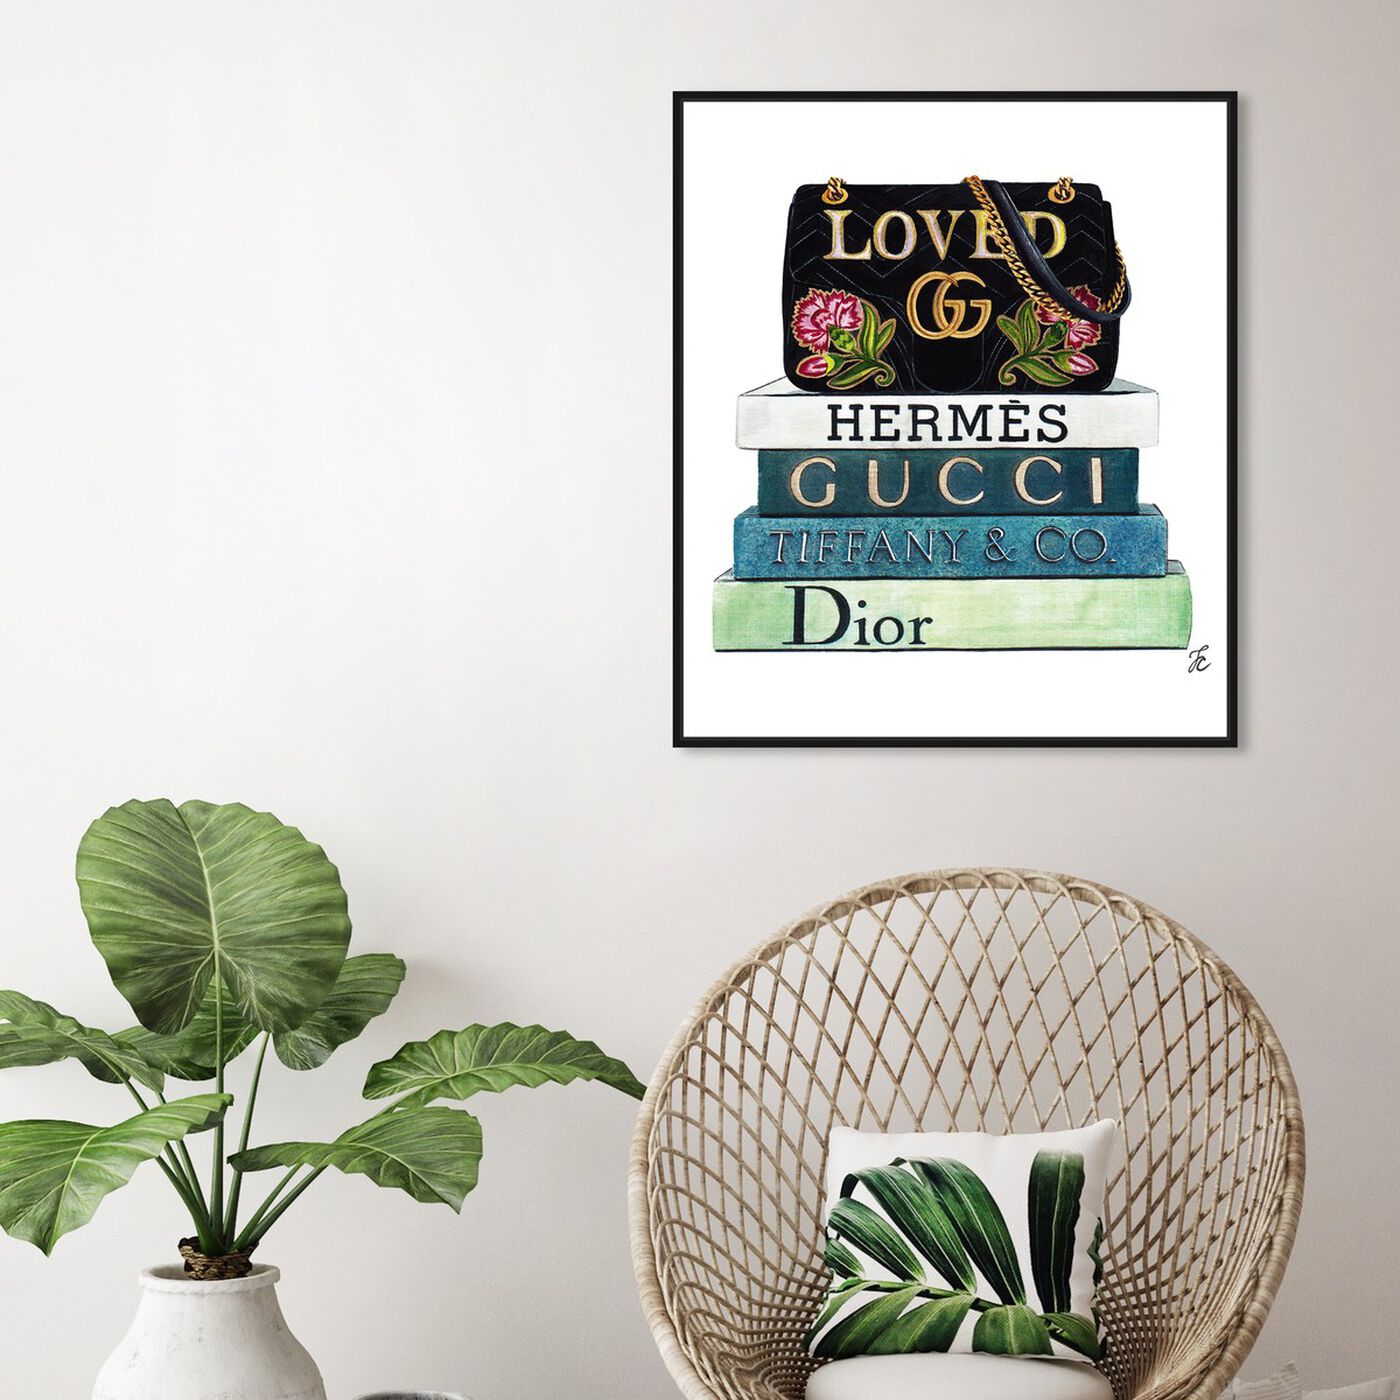 Doll Memories - Loved Bag and Fashion Books | Fashion and Glam Wall Art ...